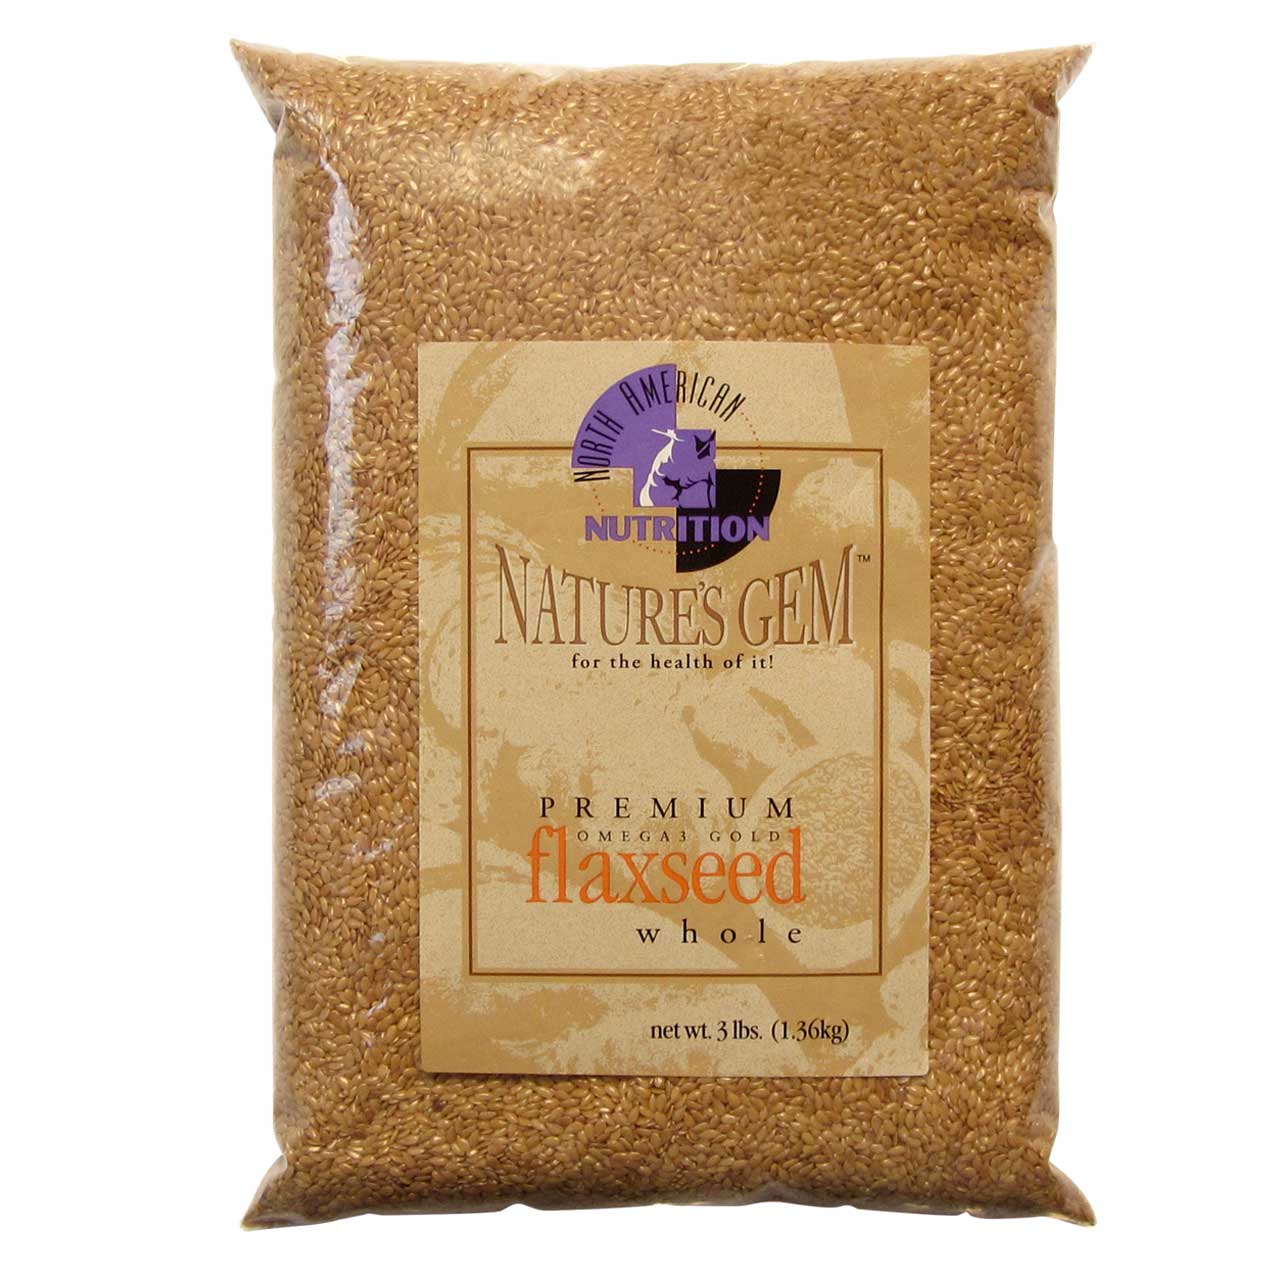 Whole Golden Flax Seed, 3lb Bag - From Goldenflax.com